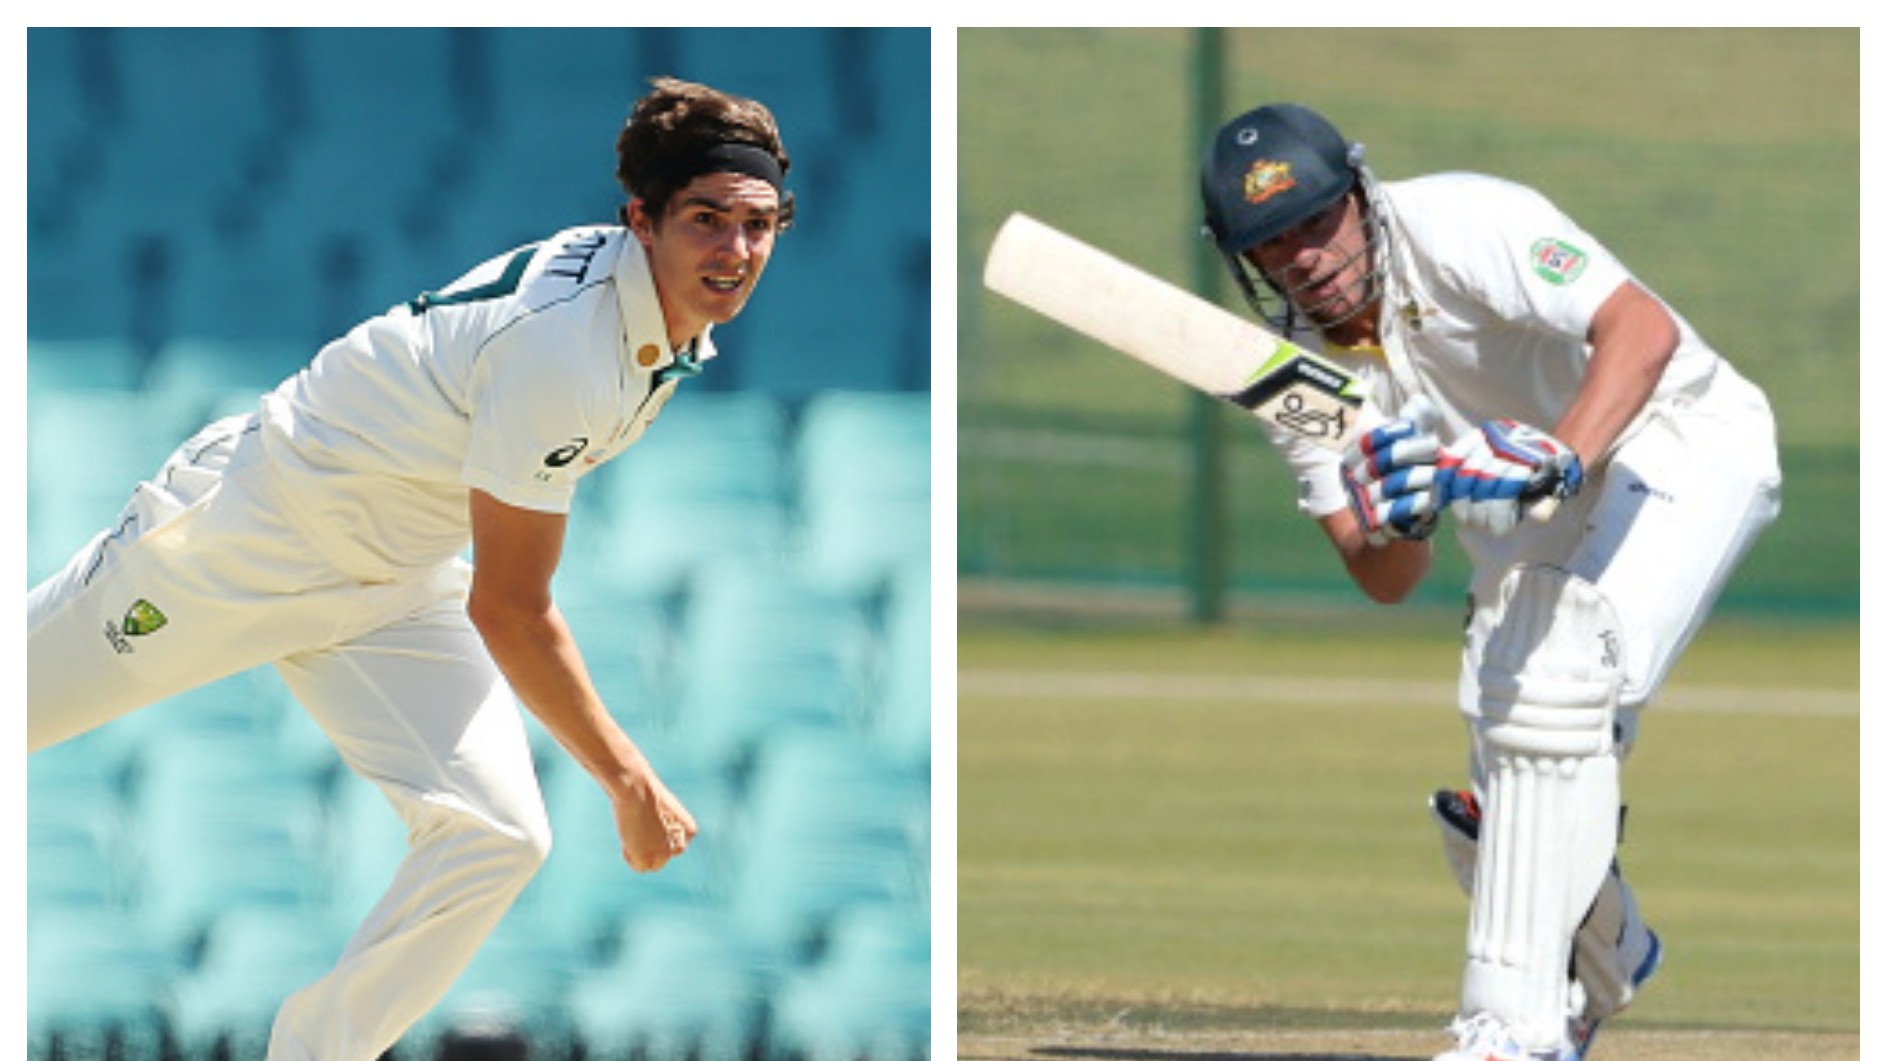 AUS v IND 2020-21: Injury to Sean Abbott makes Australia recall Moises Henriques for first Test